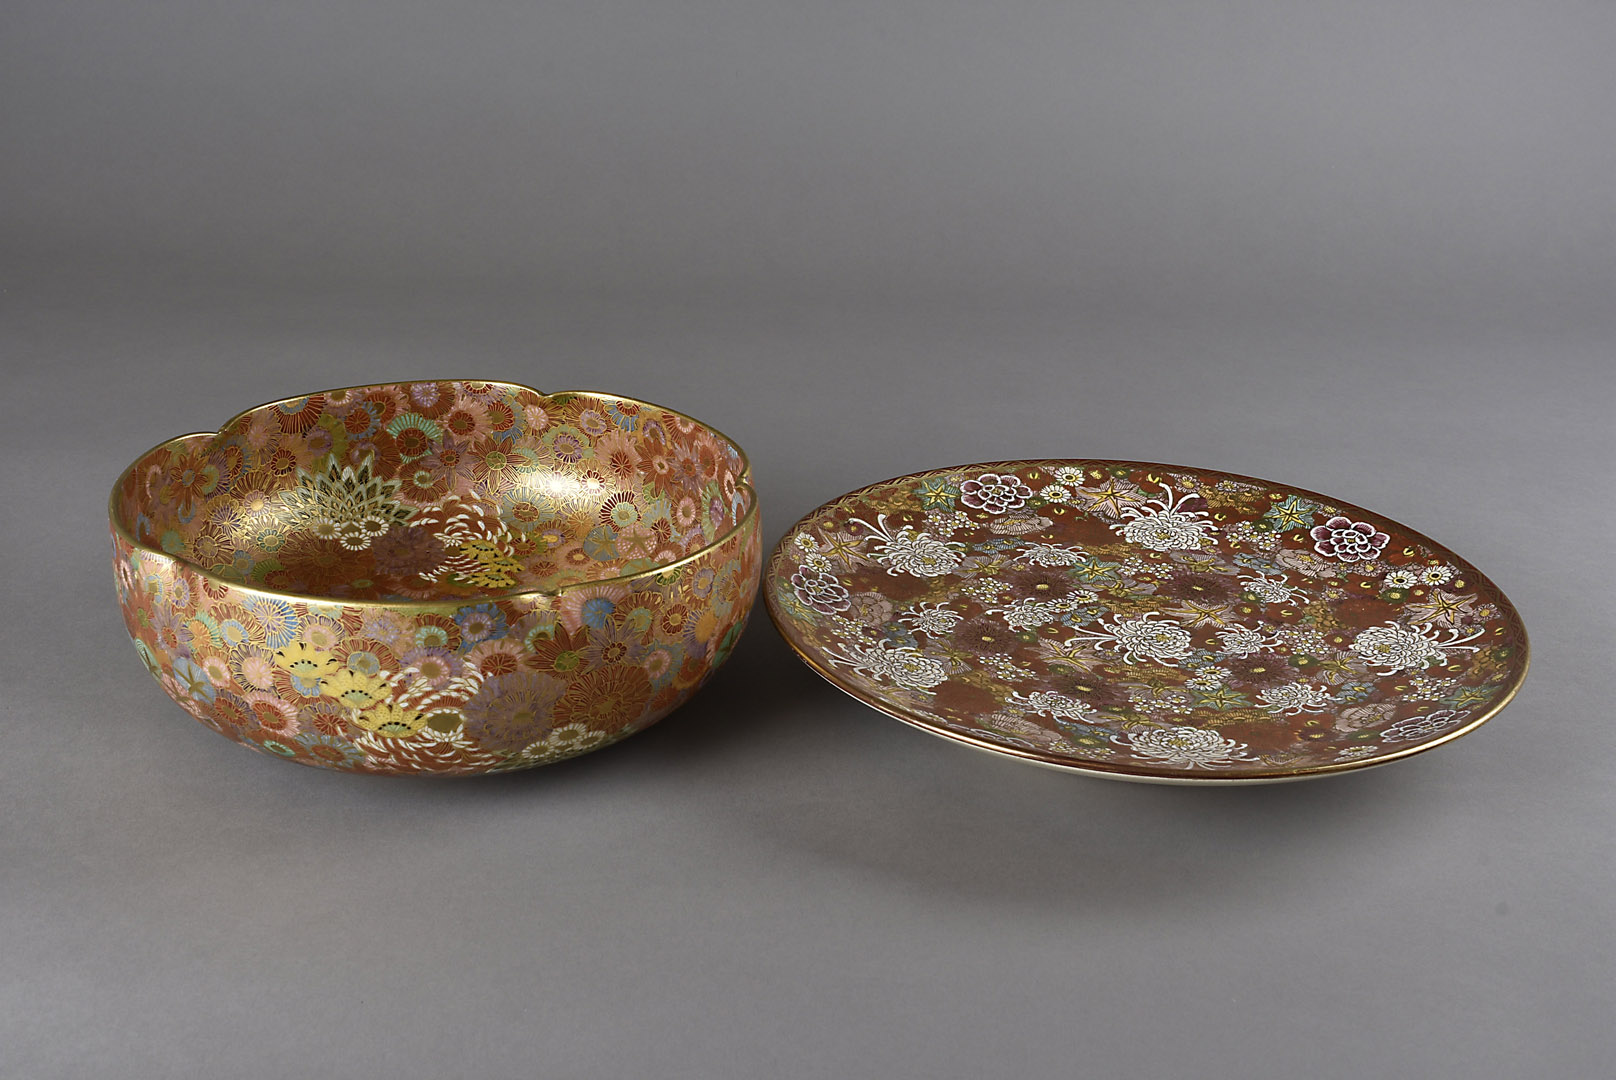 A Japanese Meiji period satsuma bowl, with crimped rim, with all over floral design heightened in